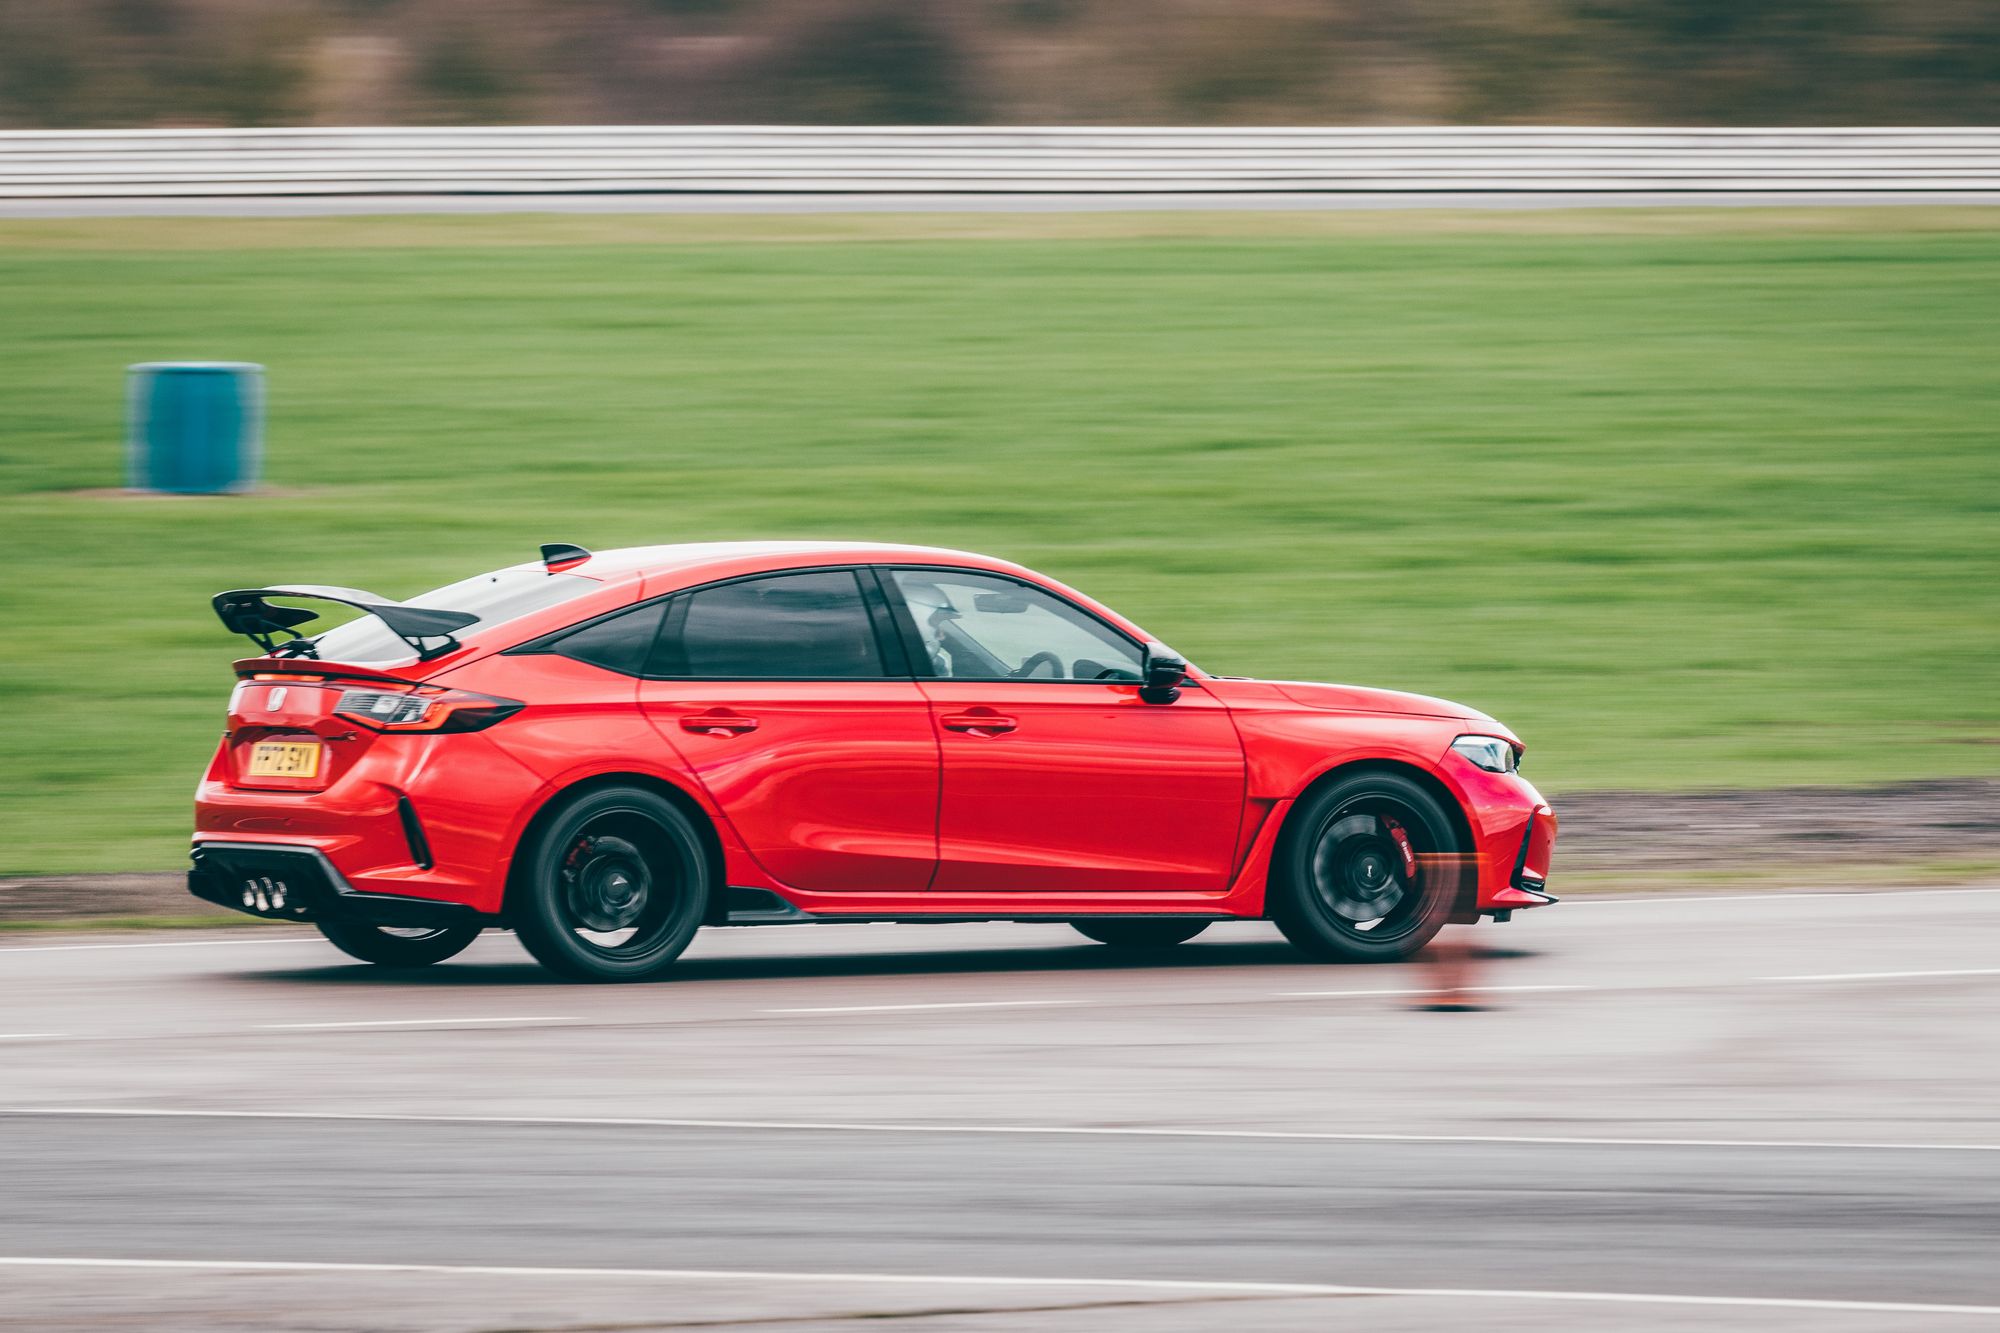 Top 10 Trackdays in the UK You Shouldn't Miss